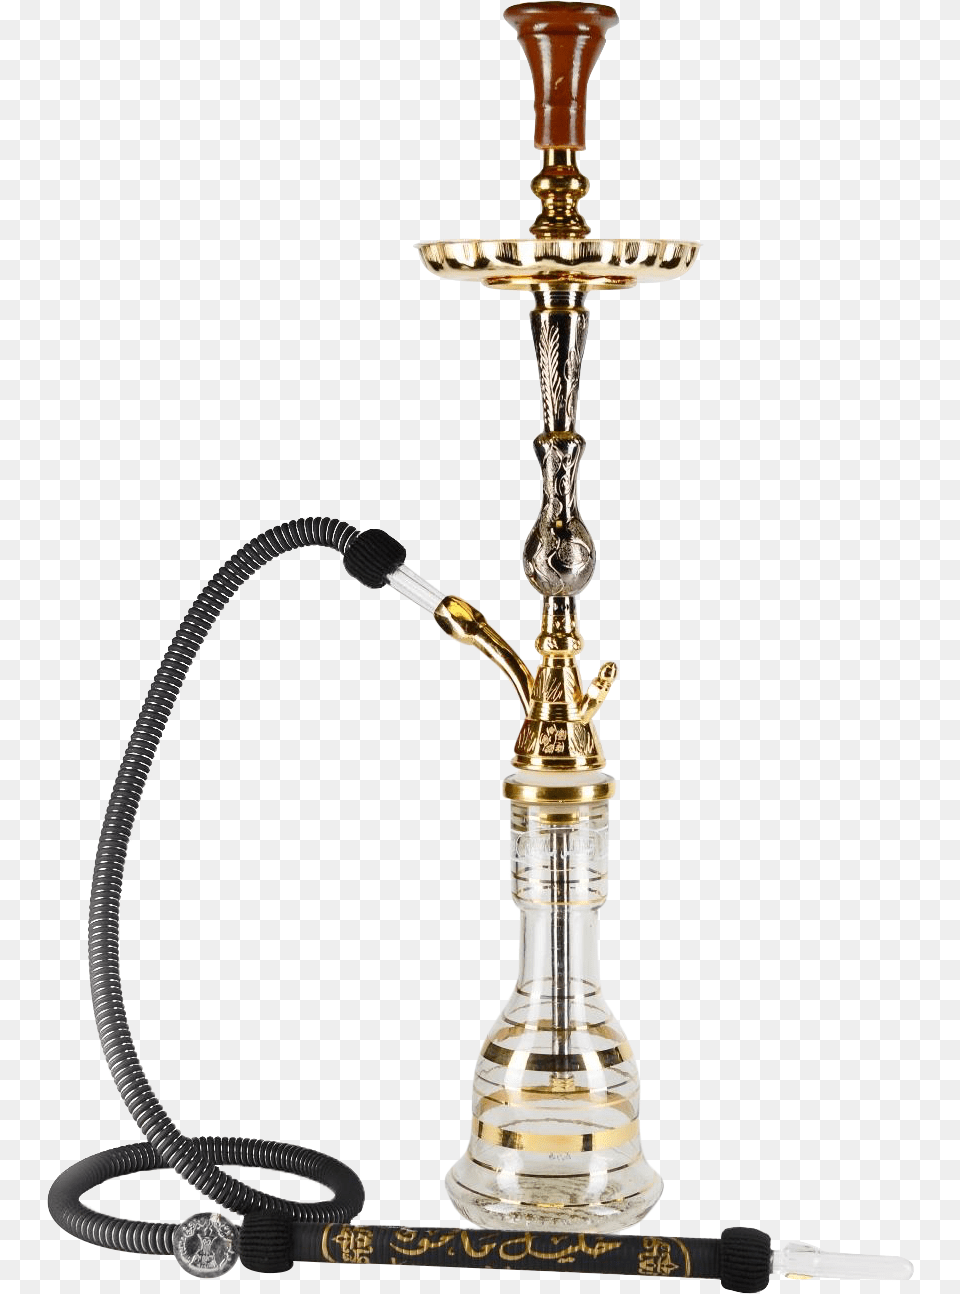 Top Of The Line Km Hookah Nargila, Face, Head, Person, Smoke Pipe Free Transparent Png